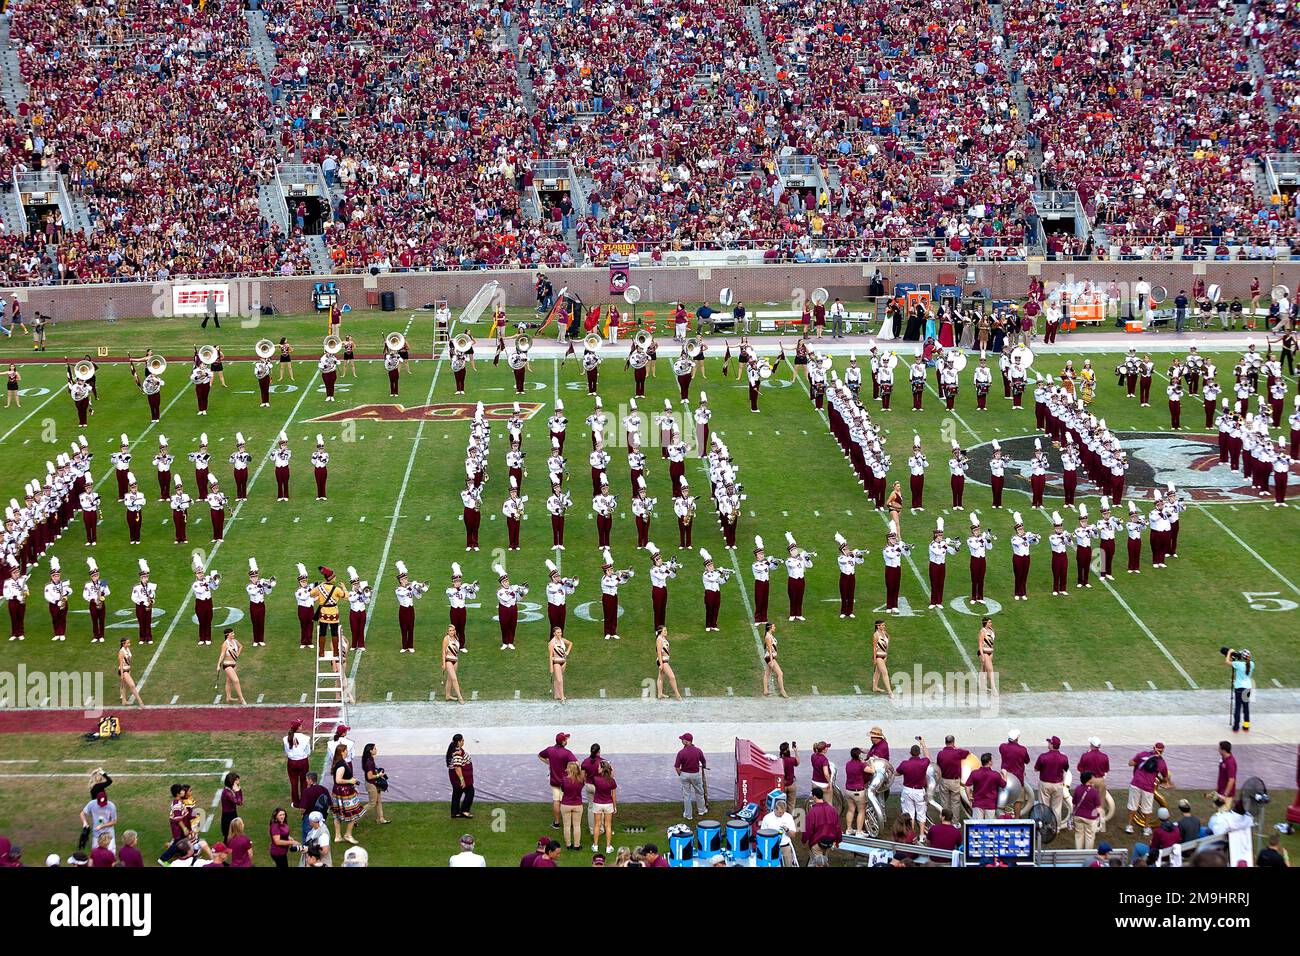 Tallahassee, Florida - November 16, 2013:  Florida State University Marching Chief's band takes the field during halftime at a home football game Stock Photo